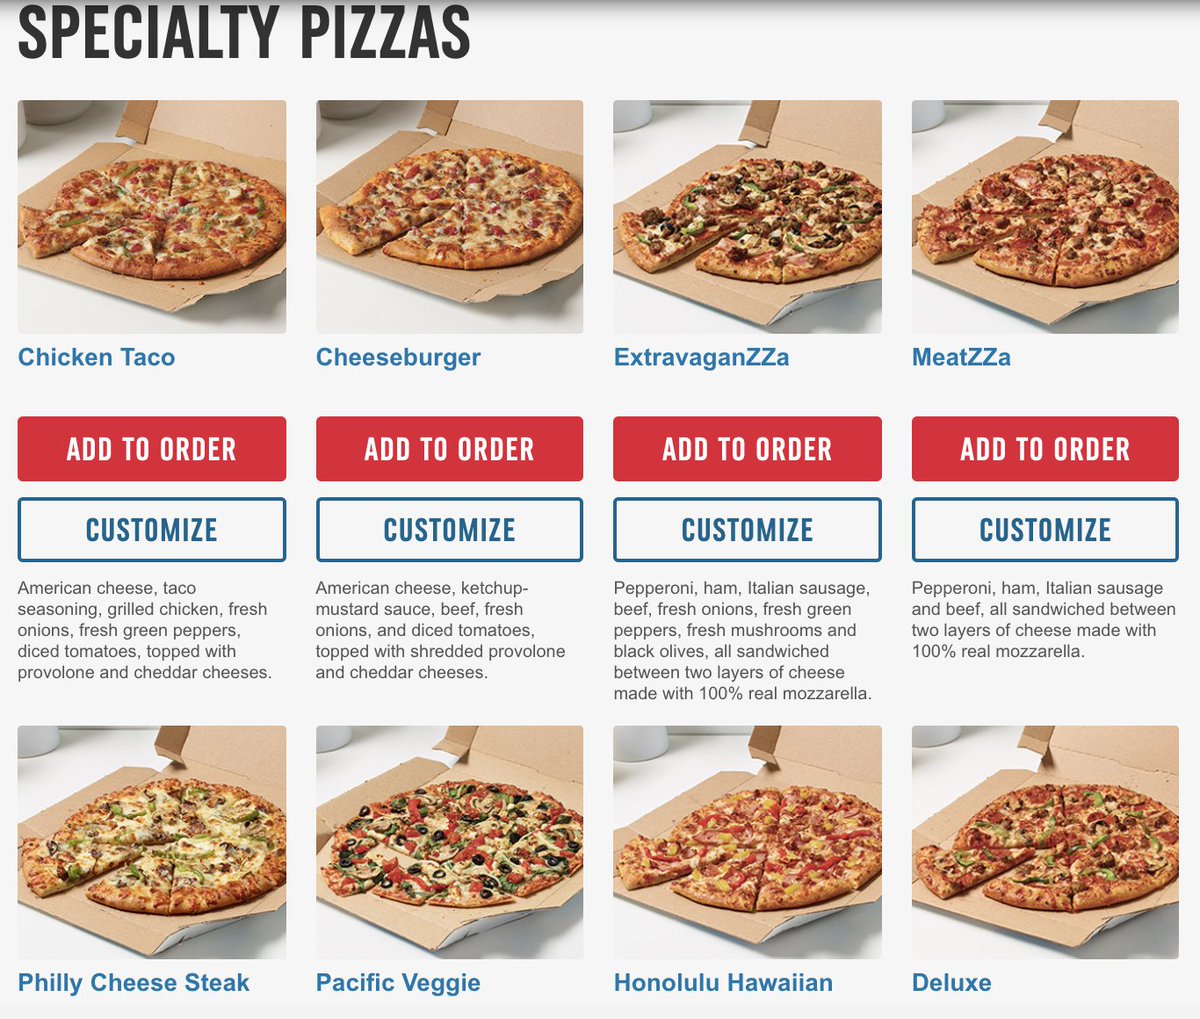 Let's say I'm feeling uninspired and want to order one of Italian Domino's specialty pizzas. They look similar to the American offerings, no?But I think what's great about Italian Domino's is that all of their specialty pizzas appear to be called "LEGEND"...for some reason.